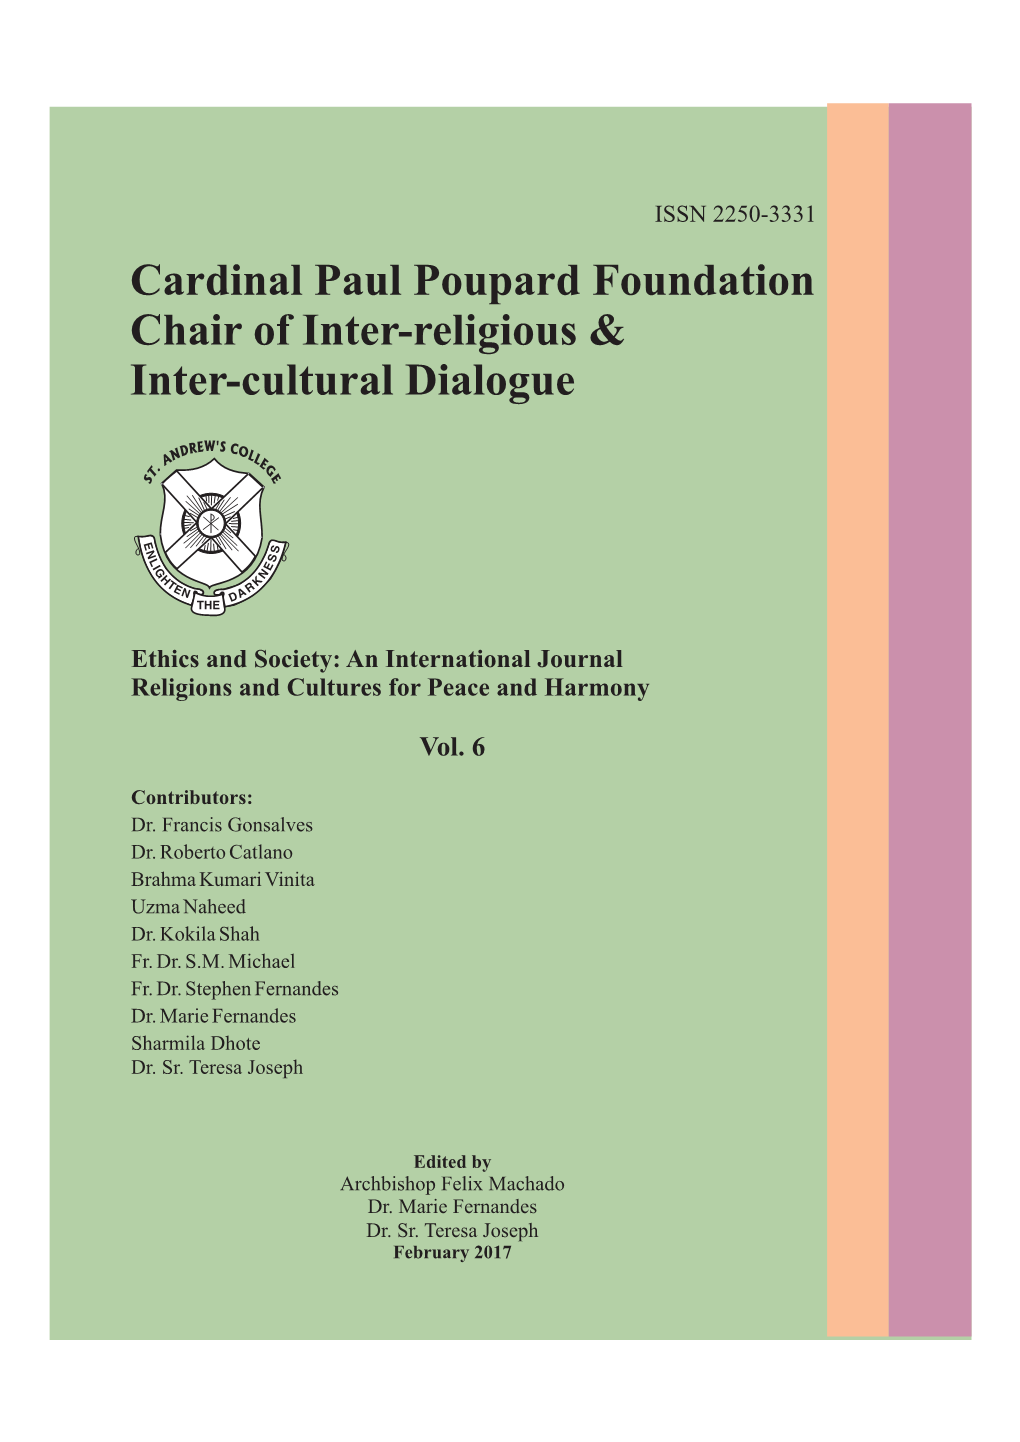 Cardinal Paul Poupard Foundation Chair of Inter-Religious & Inter-Cultural Dialogue